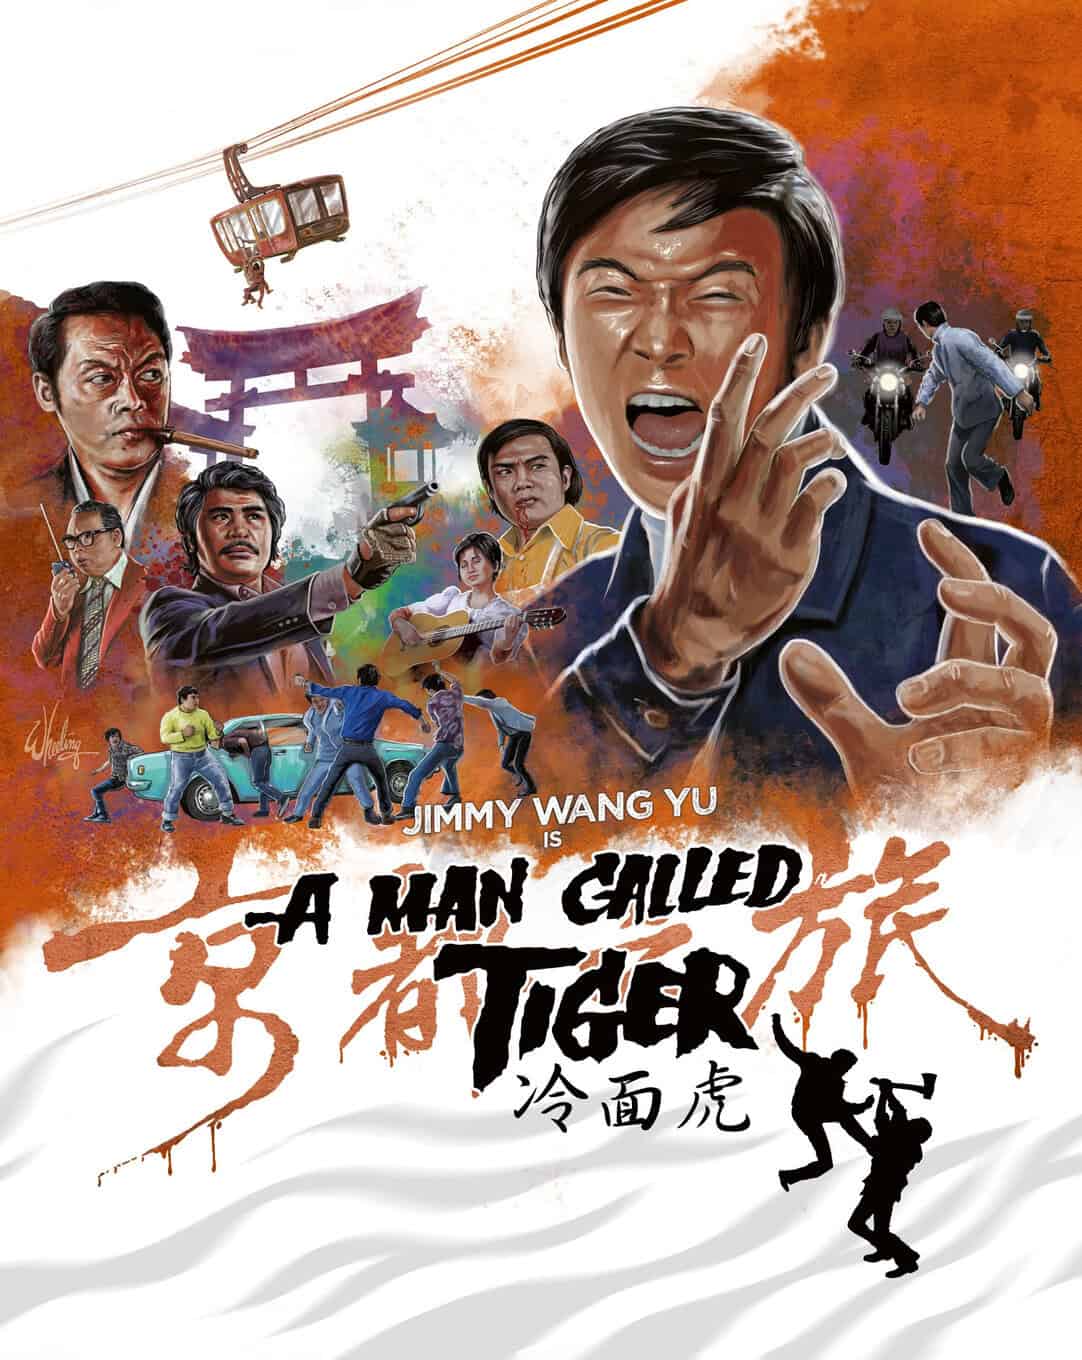 A Man Called Tiger hits Blu-ray in August